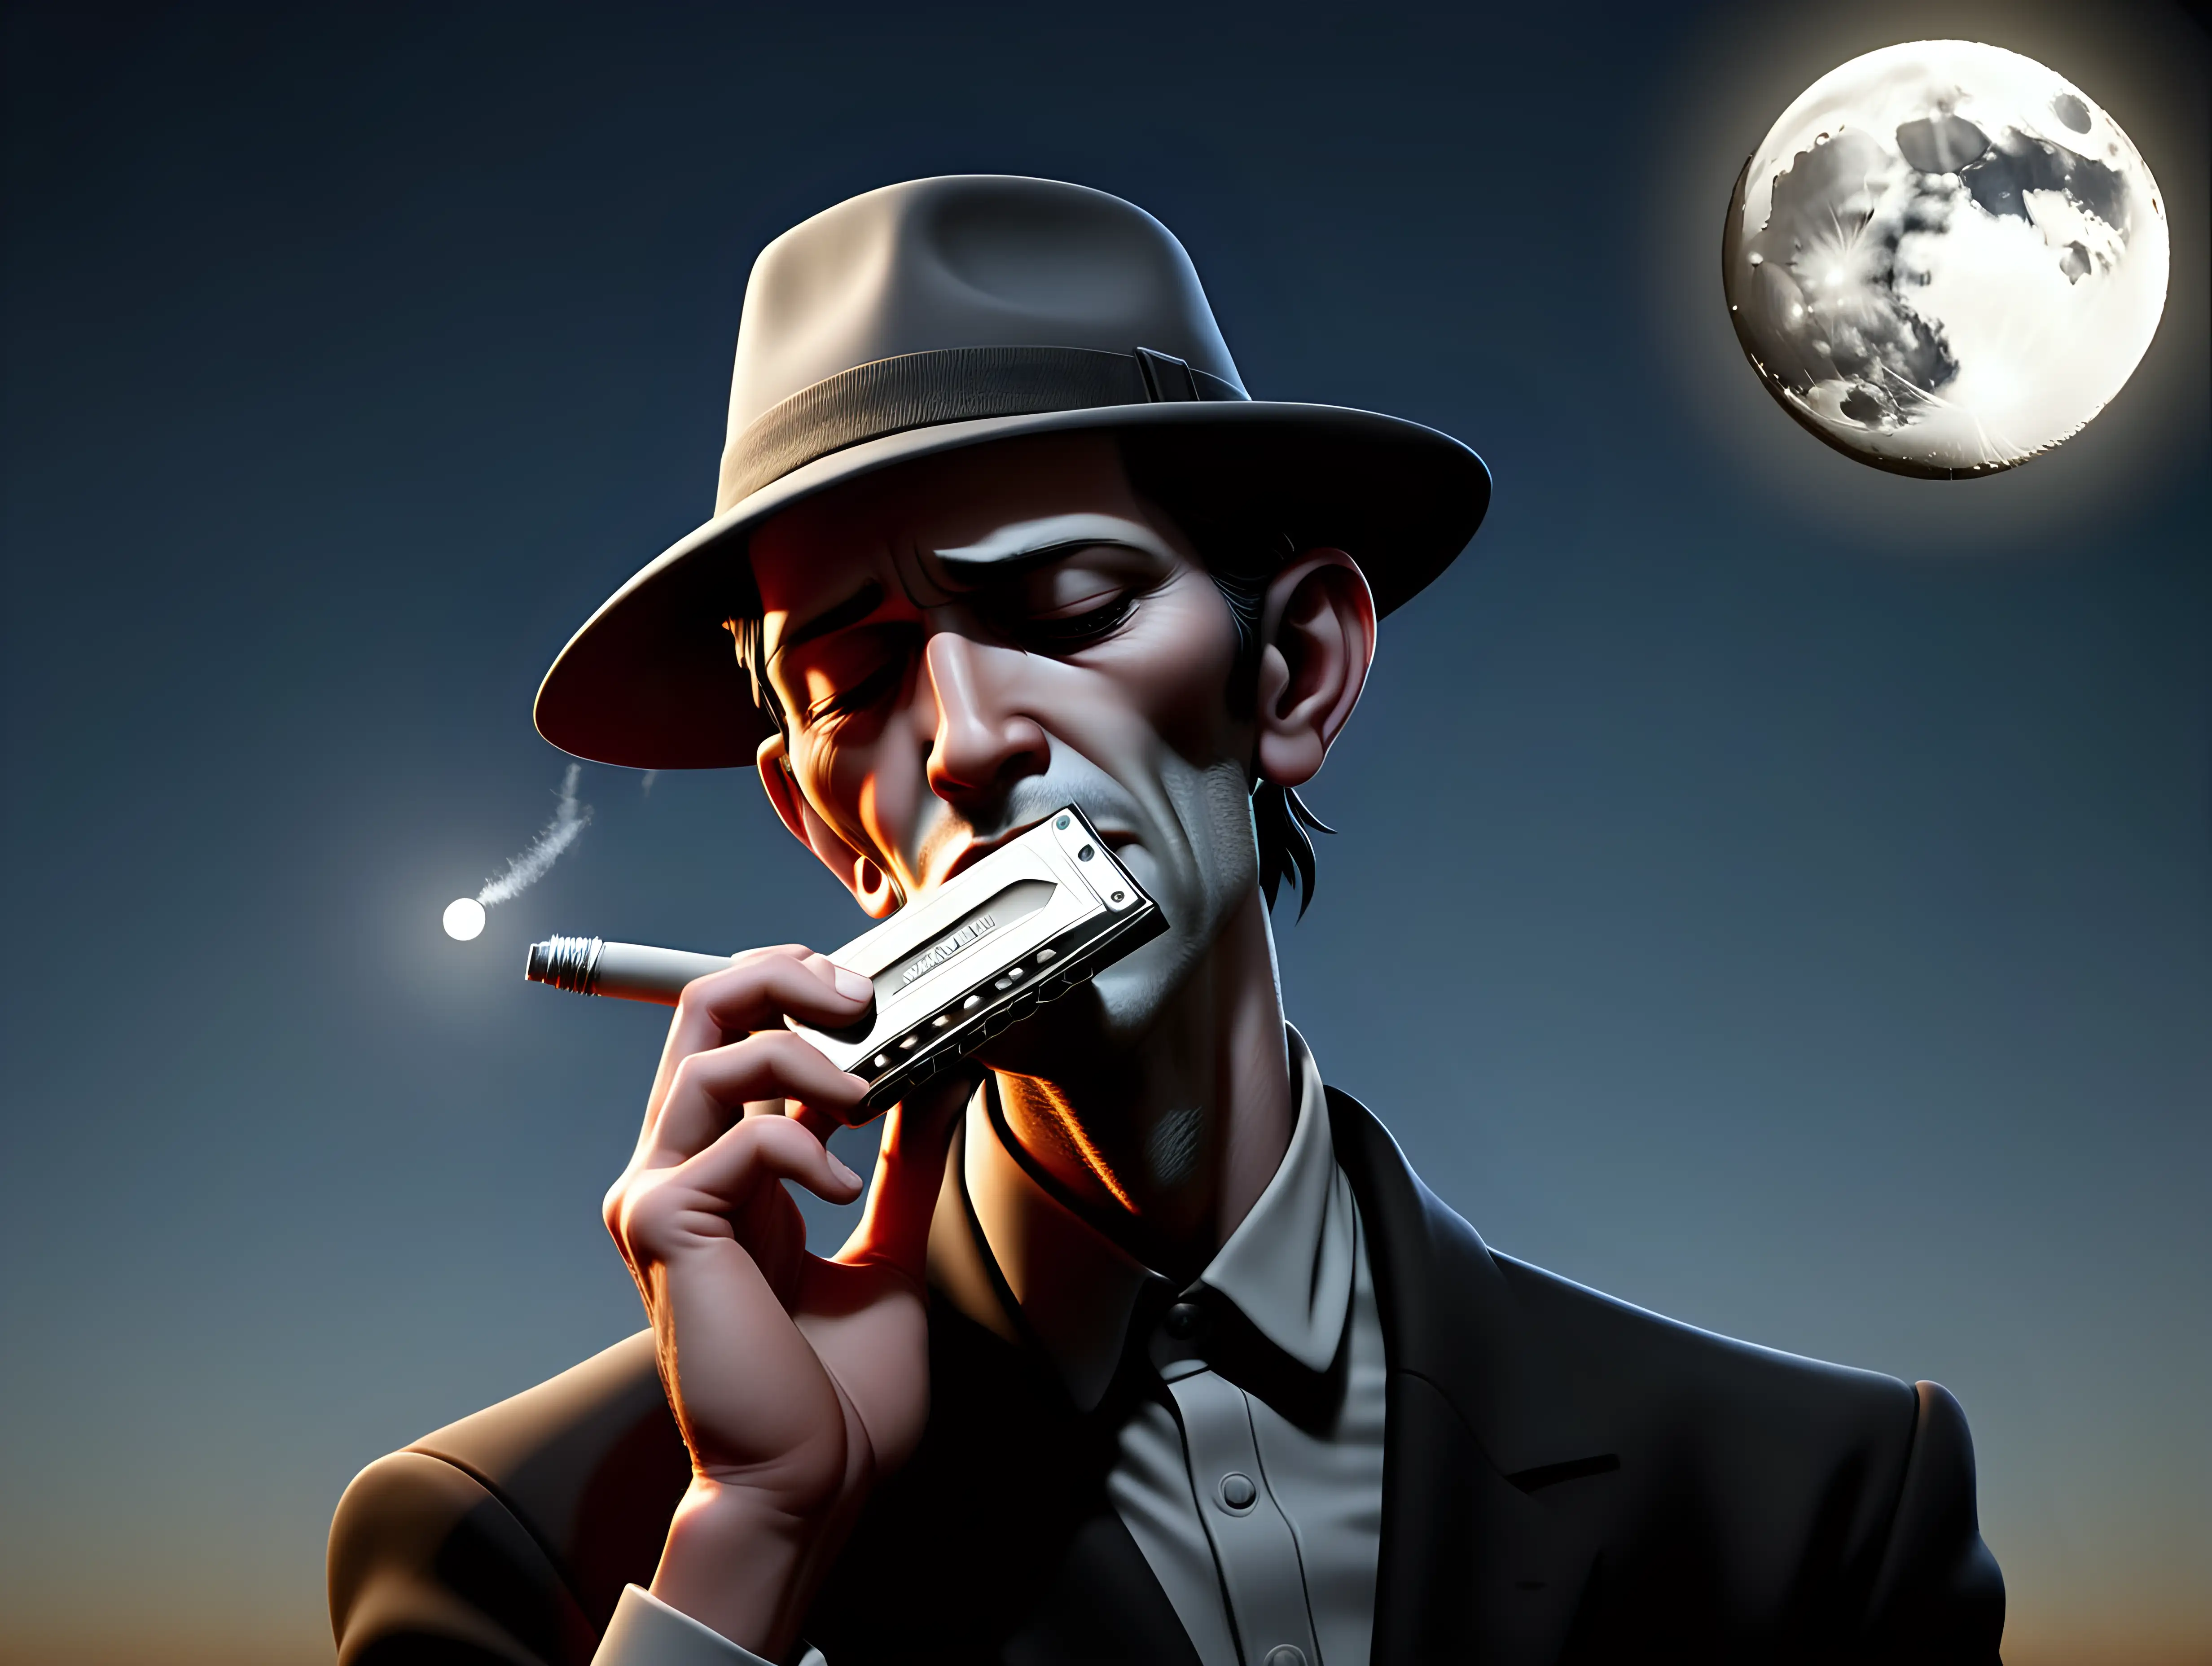 Soulful Harmonica Melody under the Rising Moon